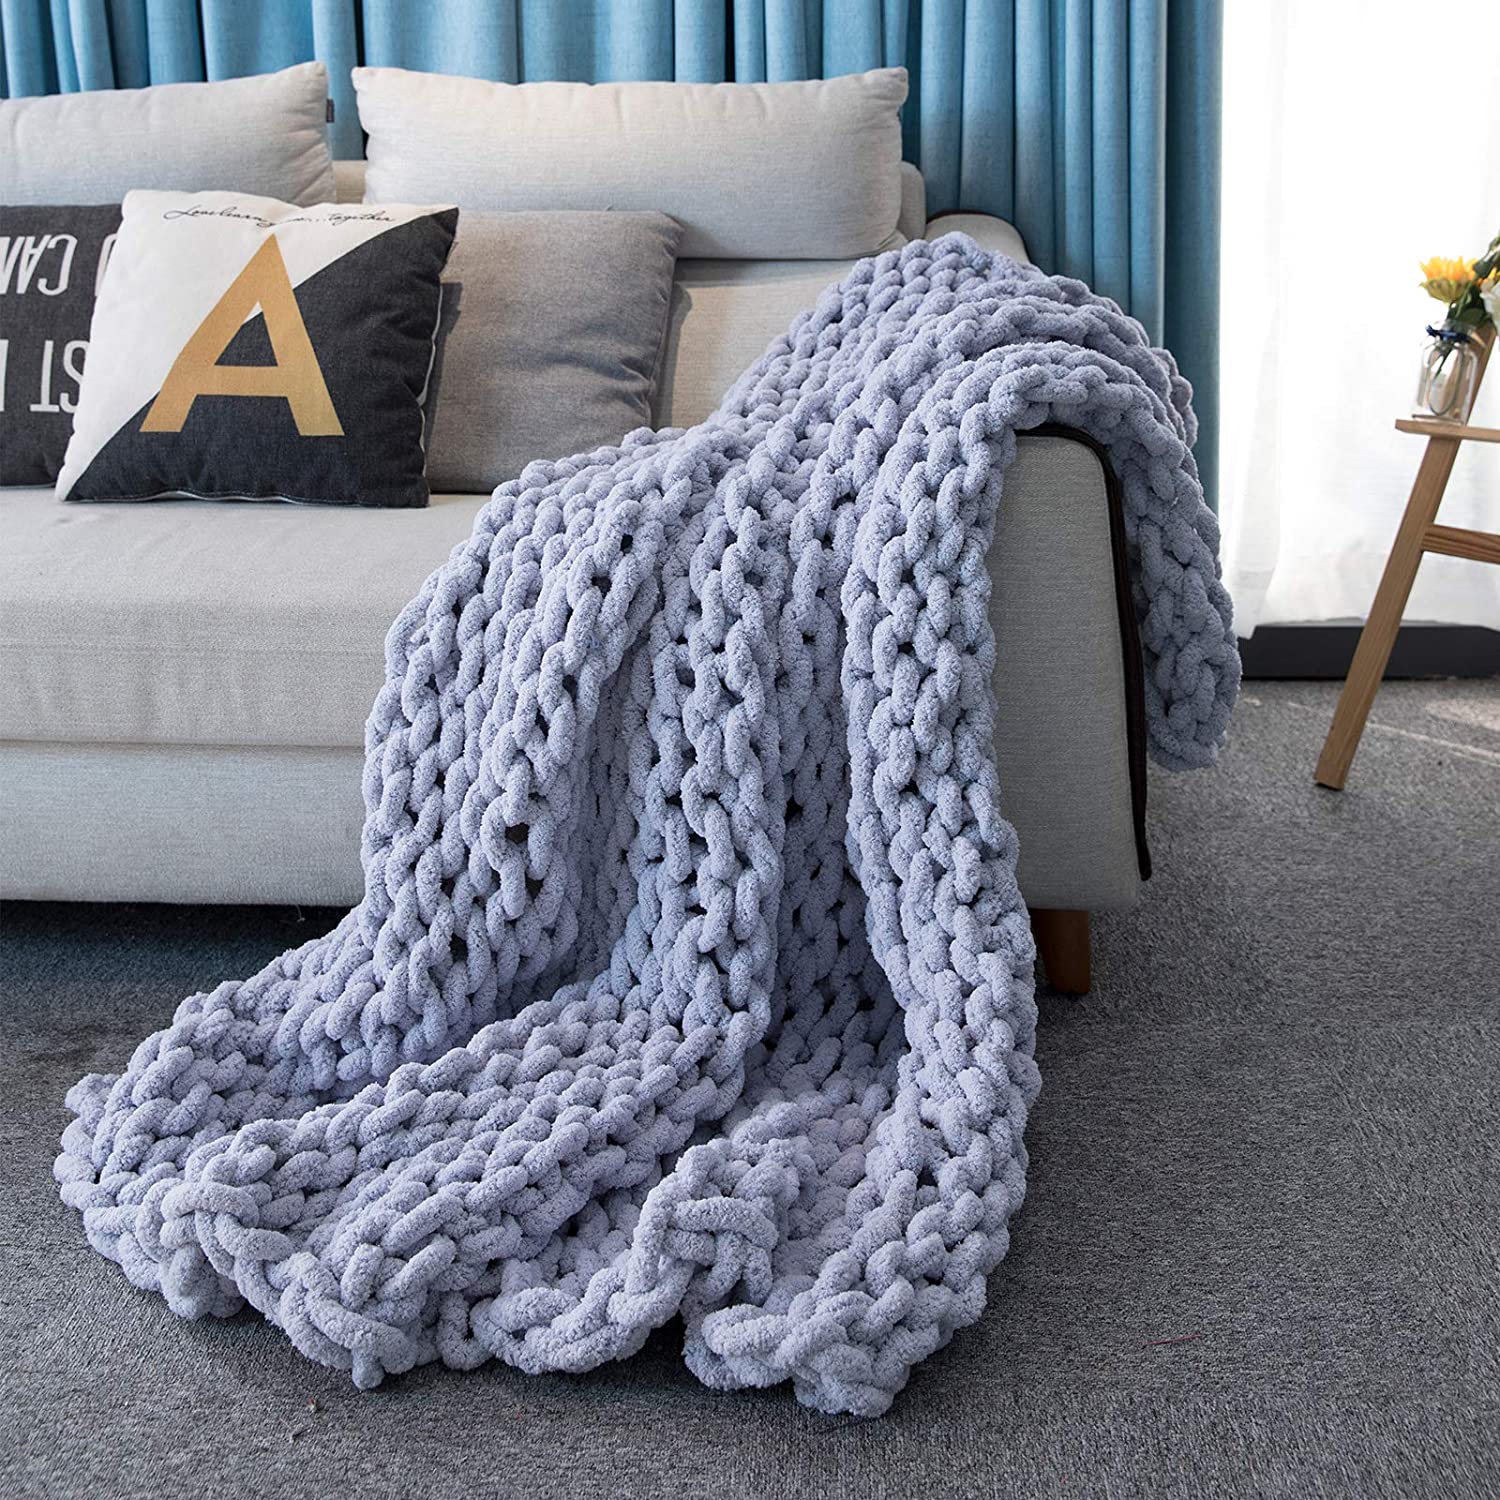 Inshere Luxury Chunky Knit Throw Blanket (48